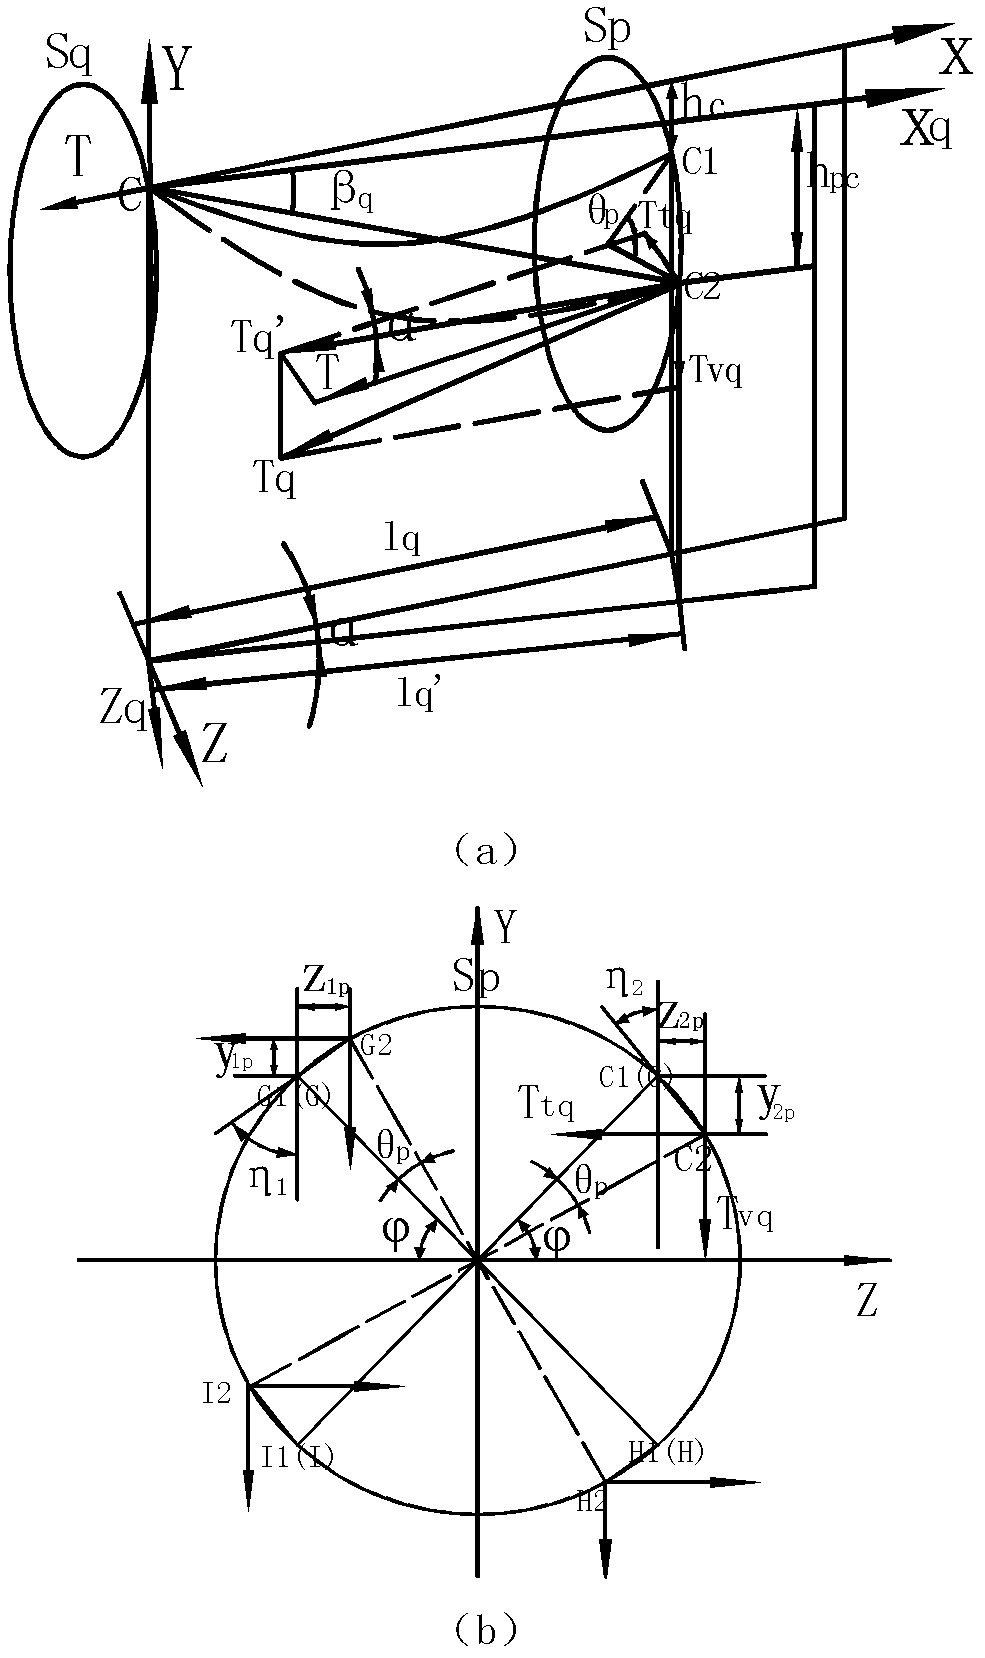 Computing method for torsional rigidity of split conductor of overhead power transmission line